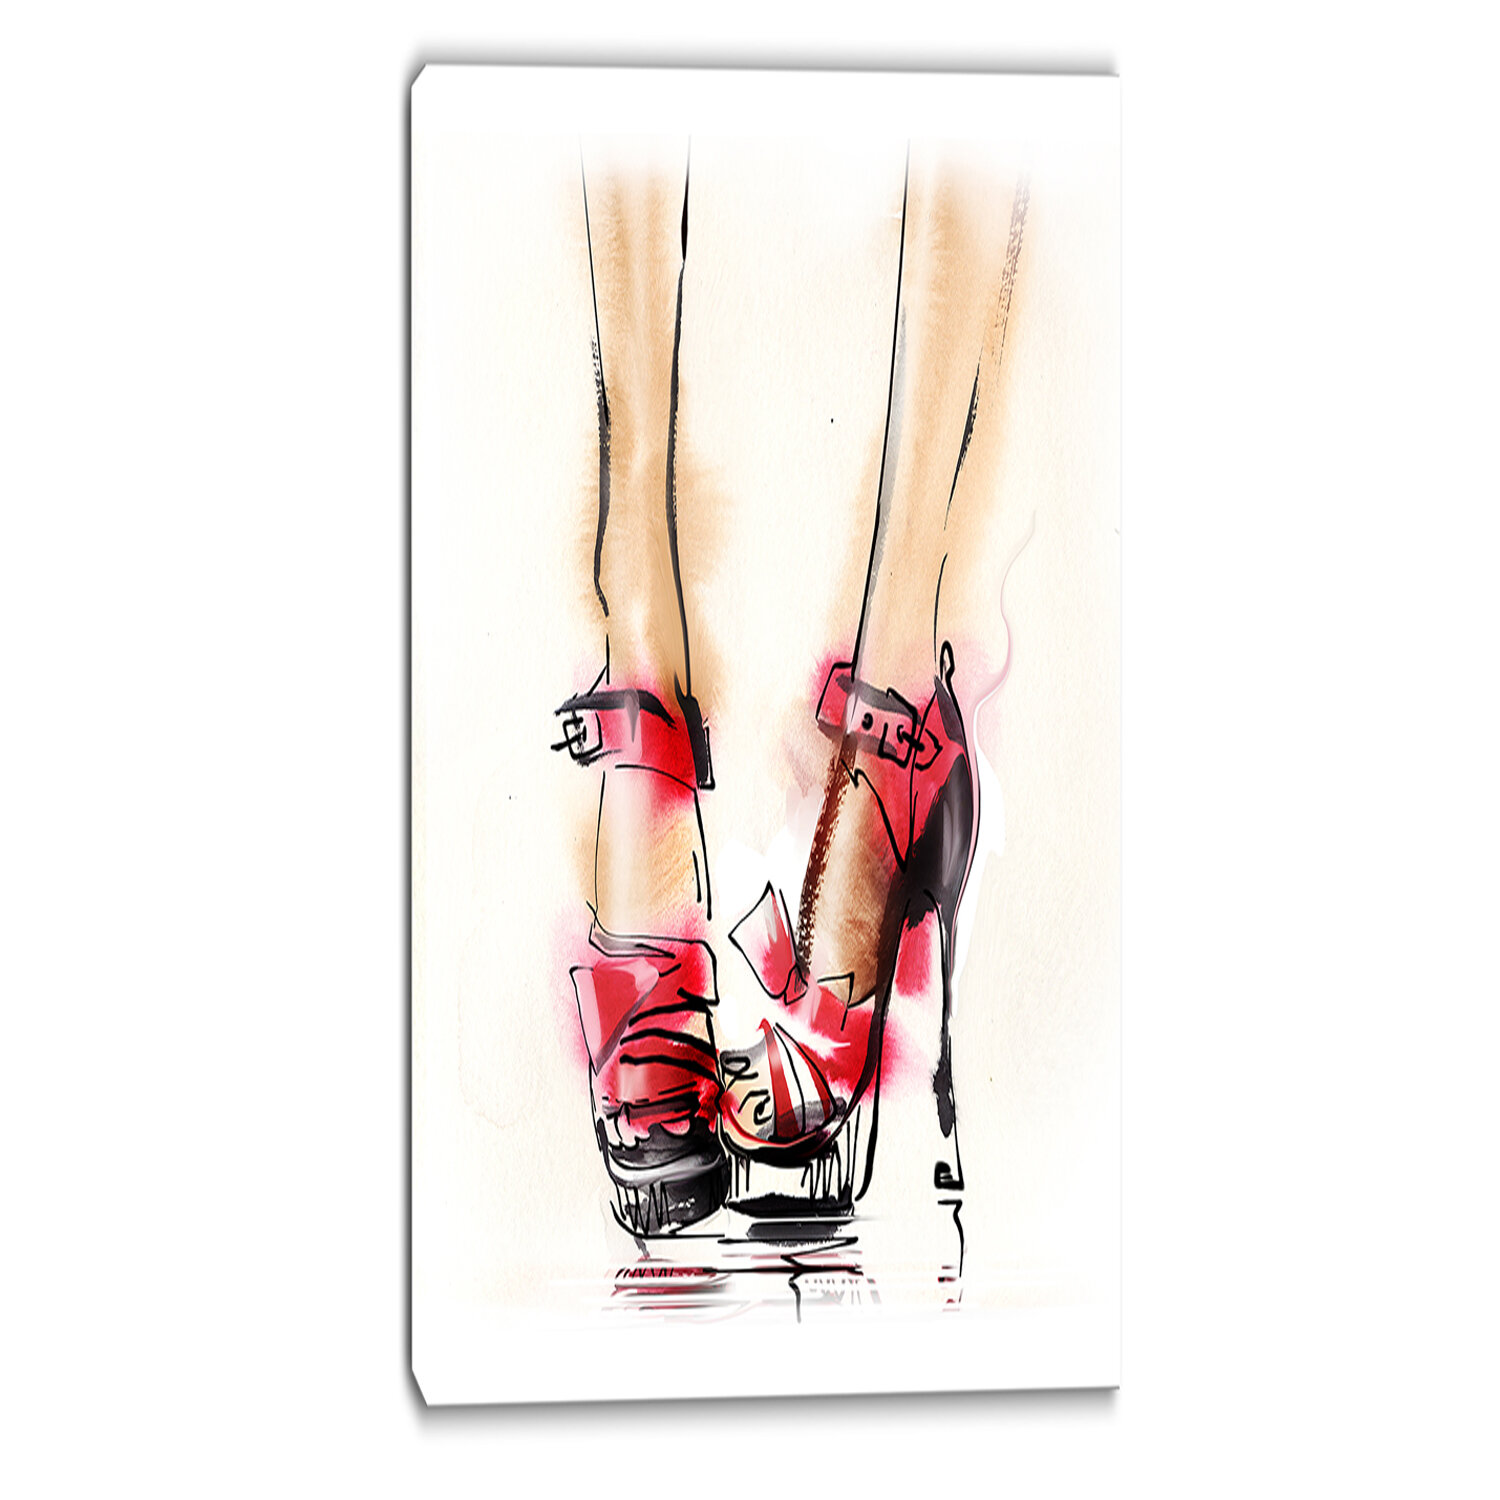  Fashion Poster Red Bottom High Heels Wall Art DecorShoes Poster  Fashion Illustration High Heels Art Print Of Watercolor Hand Painted-Matte  Paper Print & Stretched Canvas Print : Handmade Products